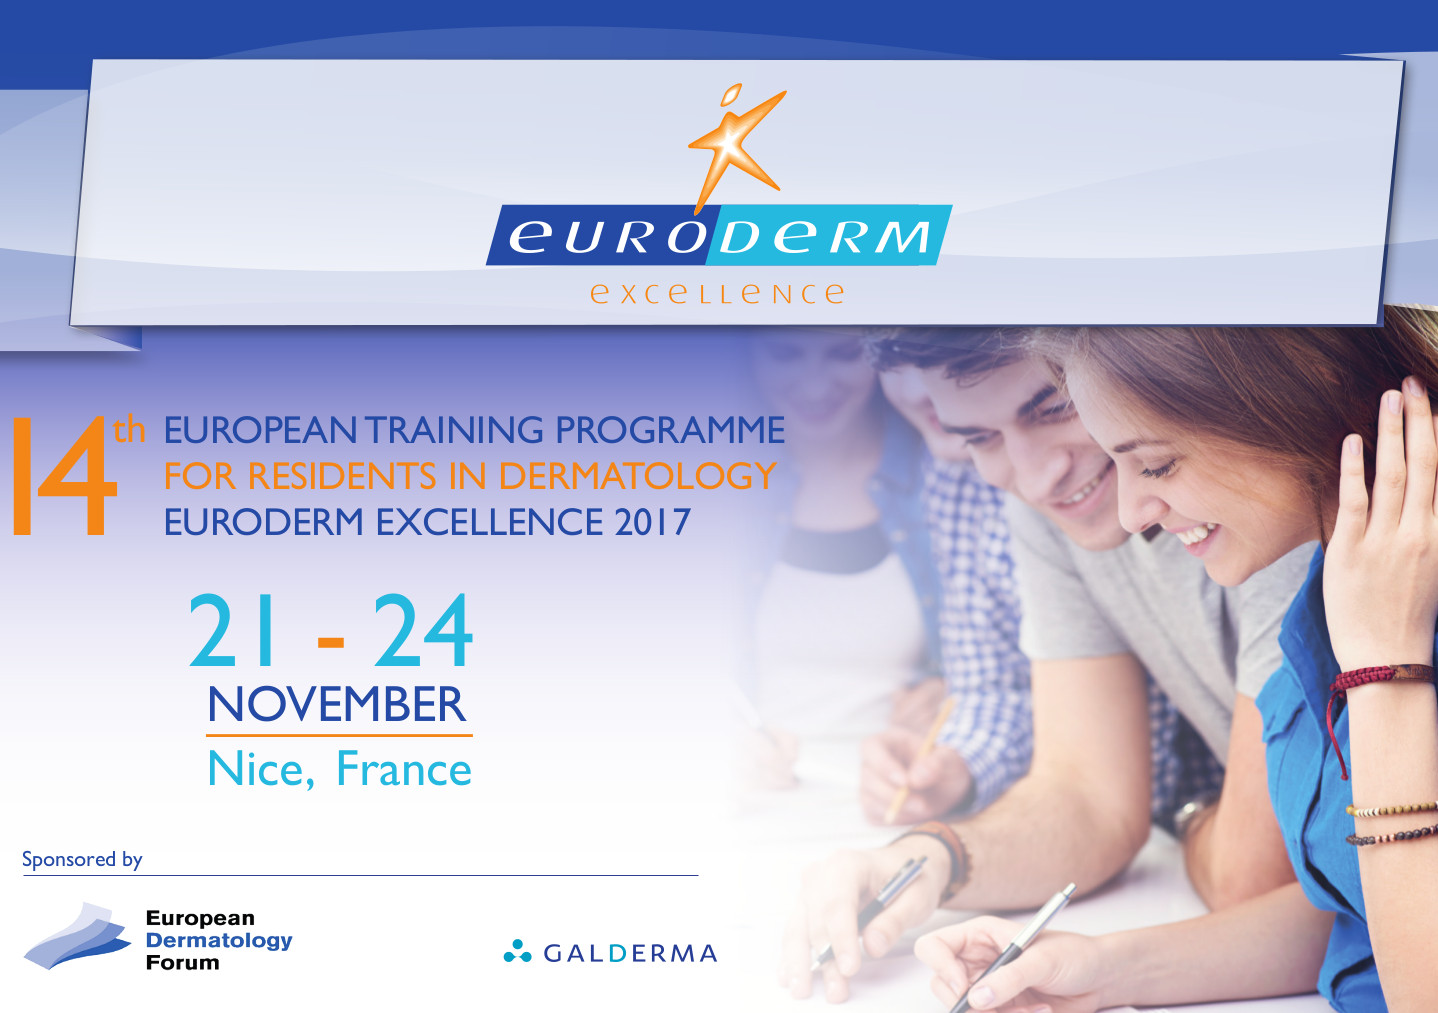 14th Edition of Euroderm Excellence Training Programme